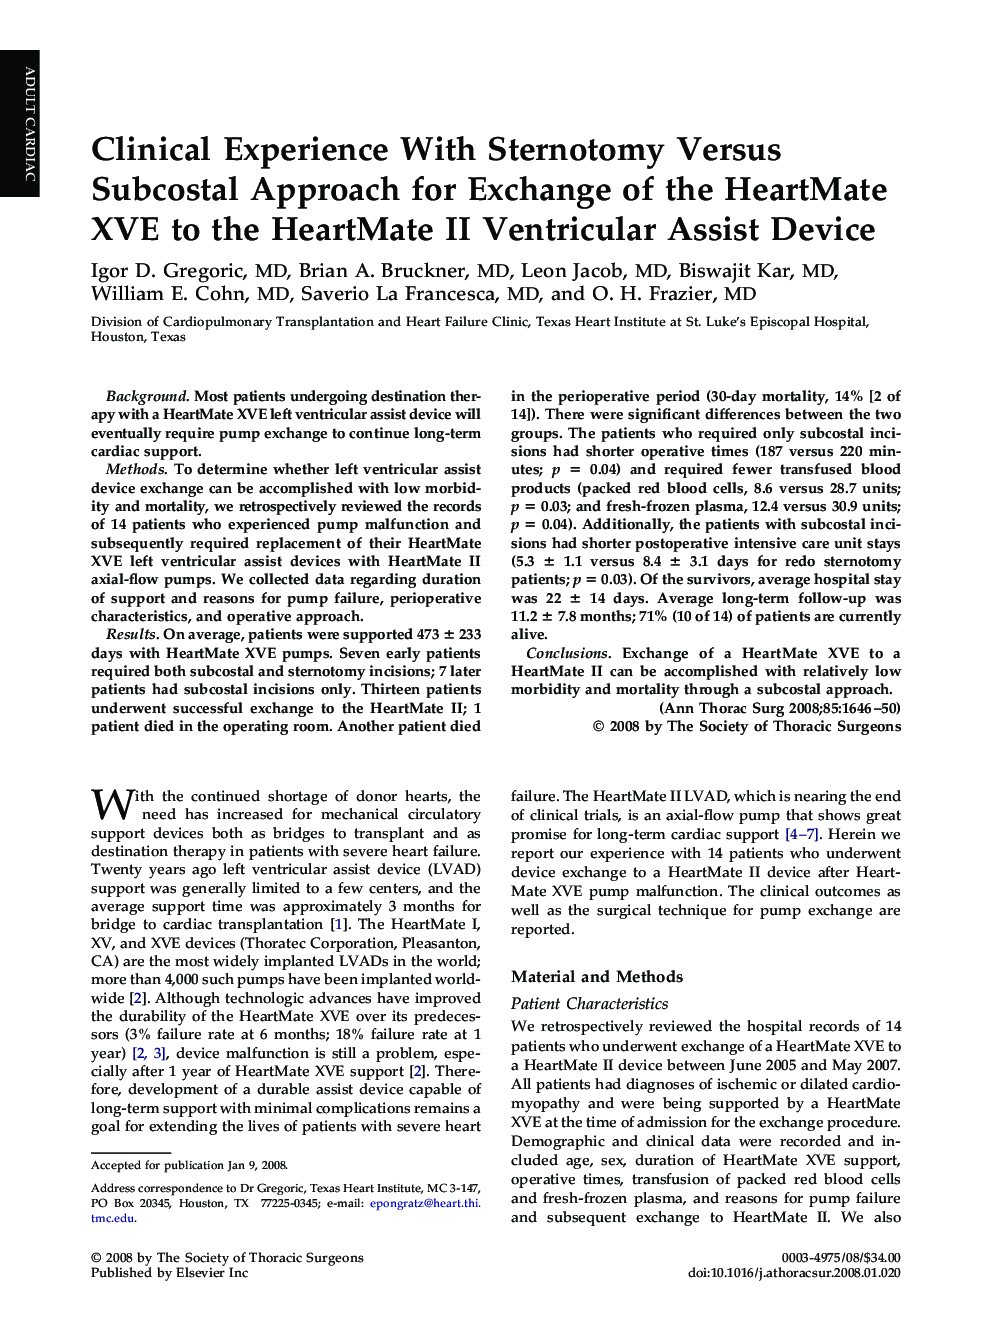 Clinical Experience With Sternotomy Versus Subcostal Approach for Exchange of the HeartMate XVE to the HeartMate II Ventricular Assist Device